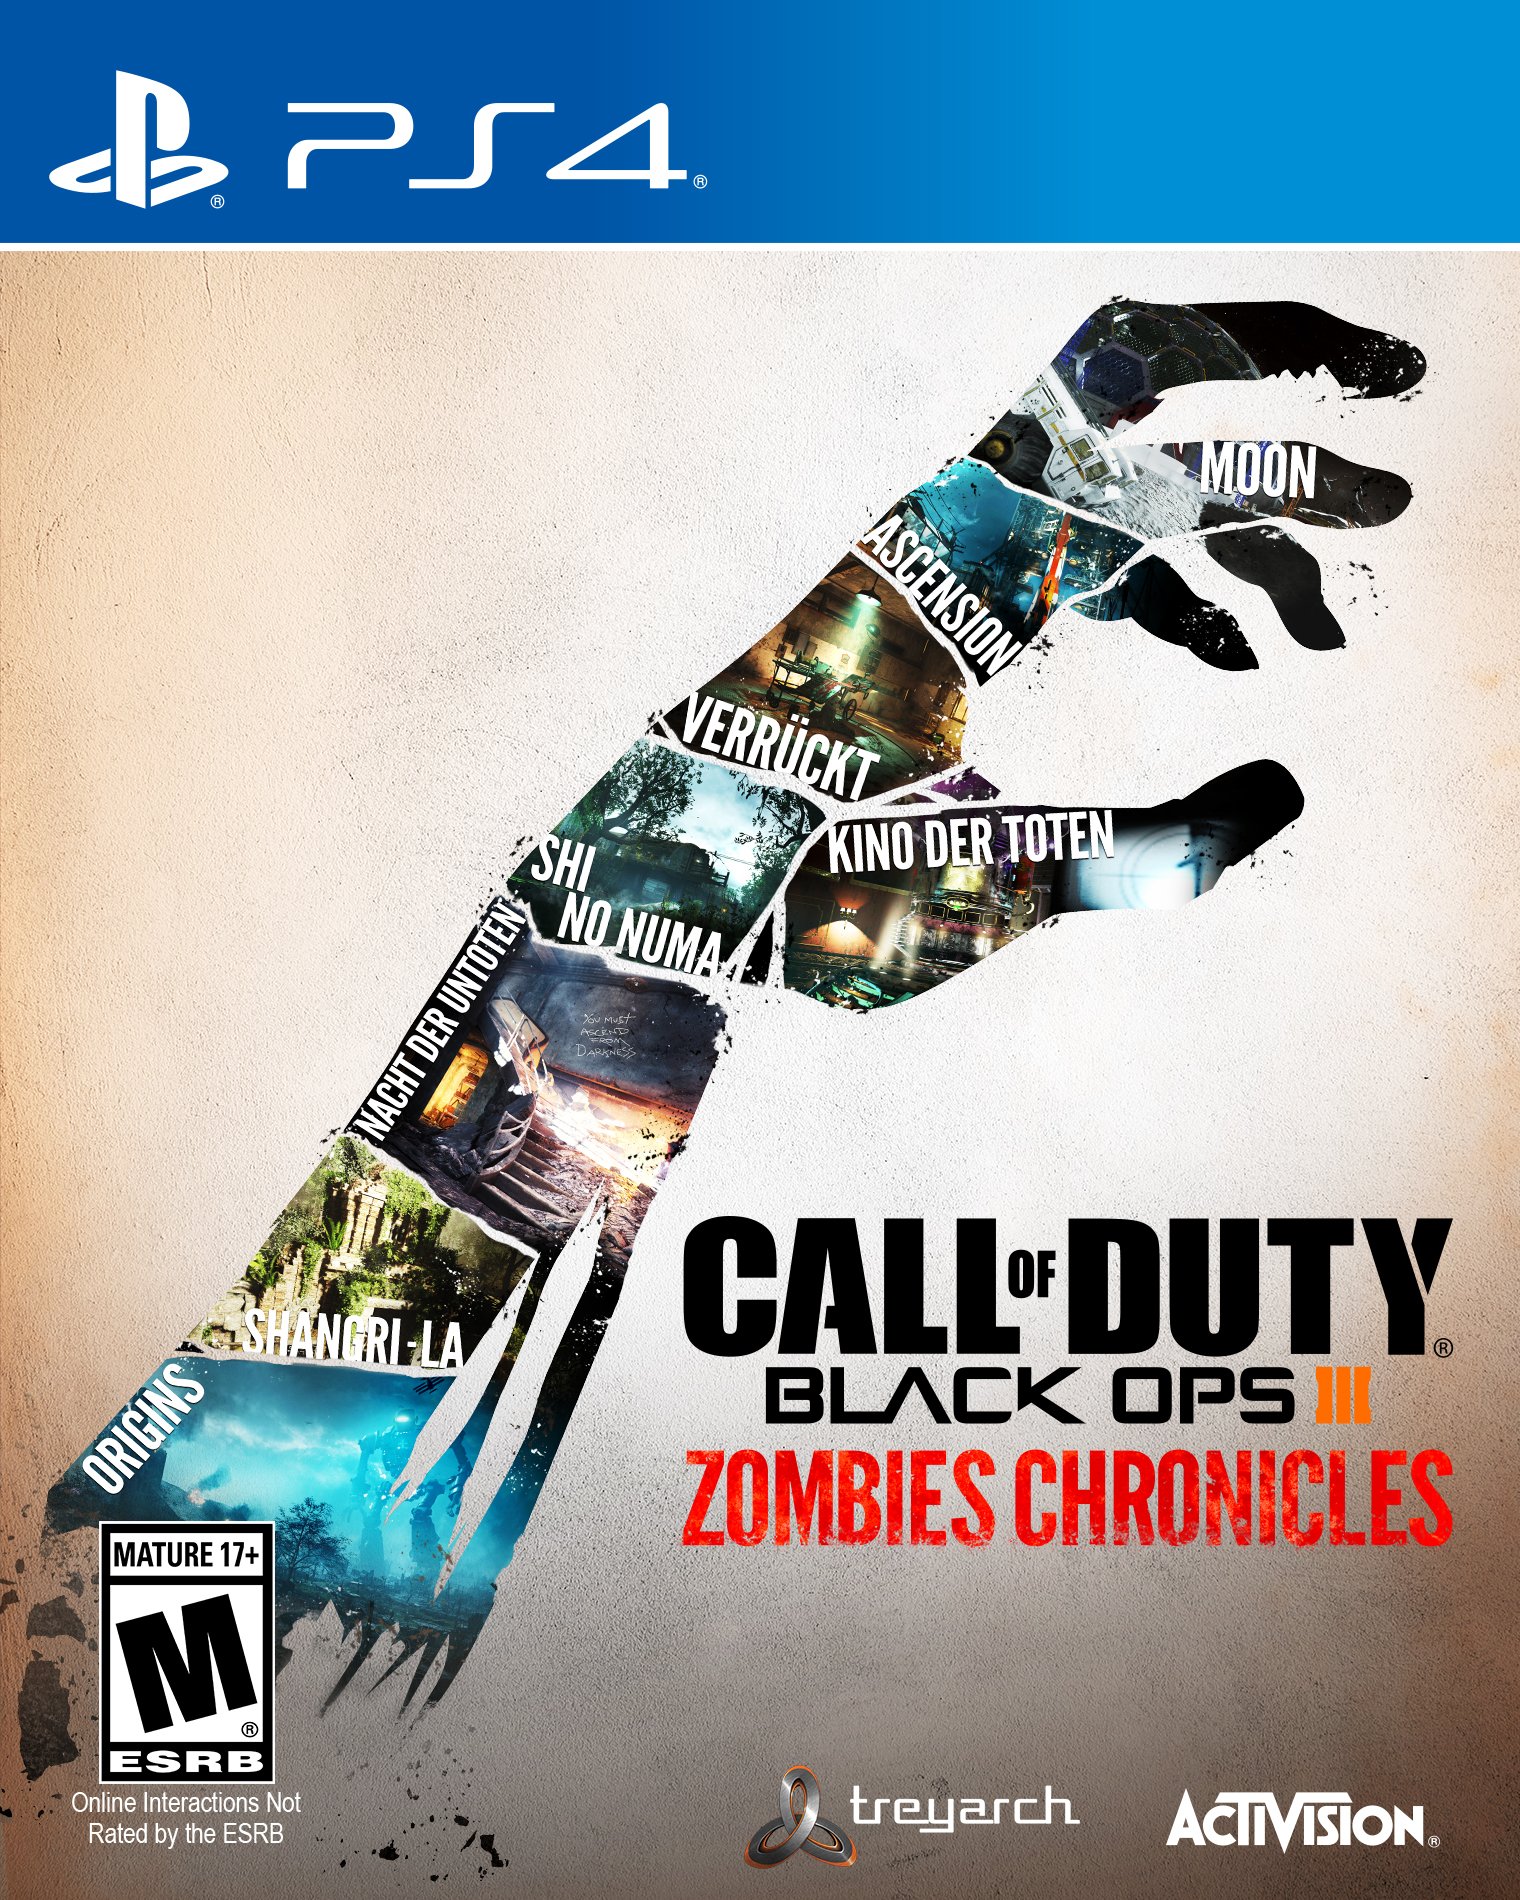 Ps3 зомби. Call of Duty Black ops 3 Zombies Chronicles. Call of Duty Black ops 3. Black ops 3 Zombies Chronicles Edition. Zombie Chronicles Black ops.